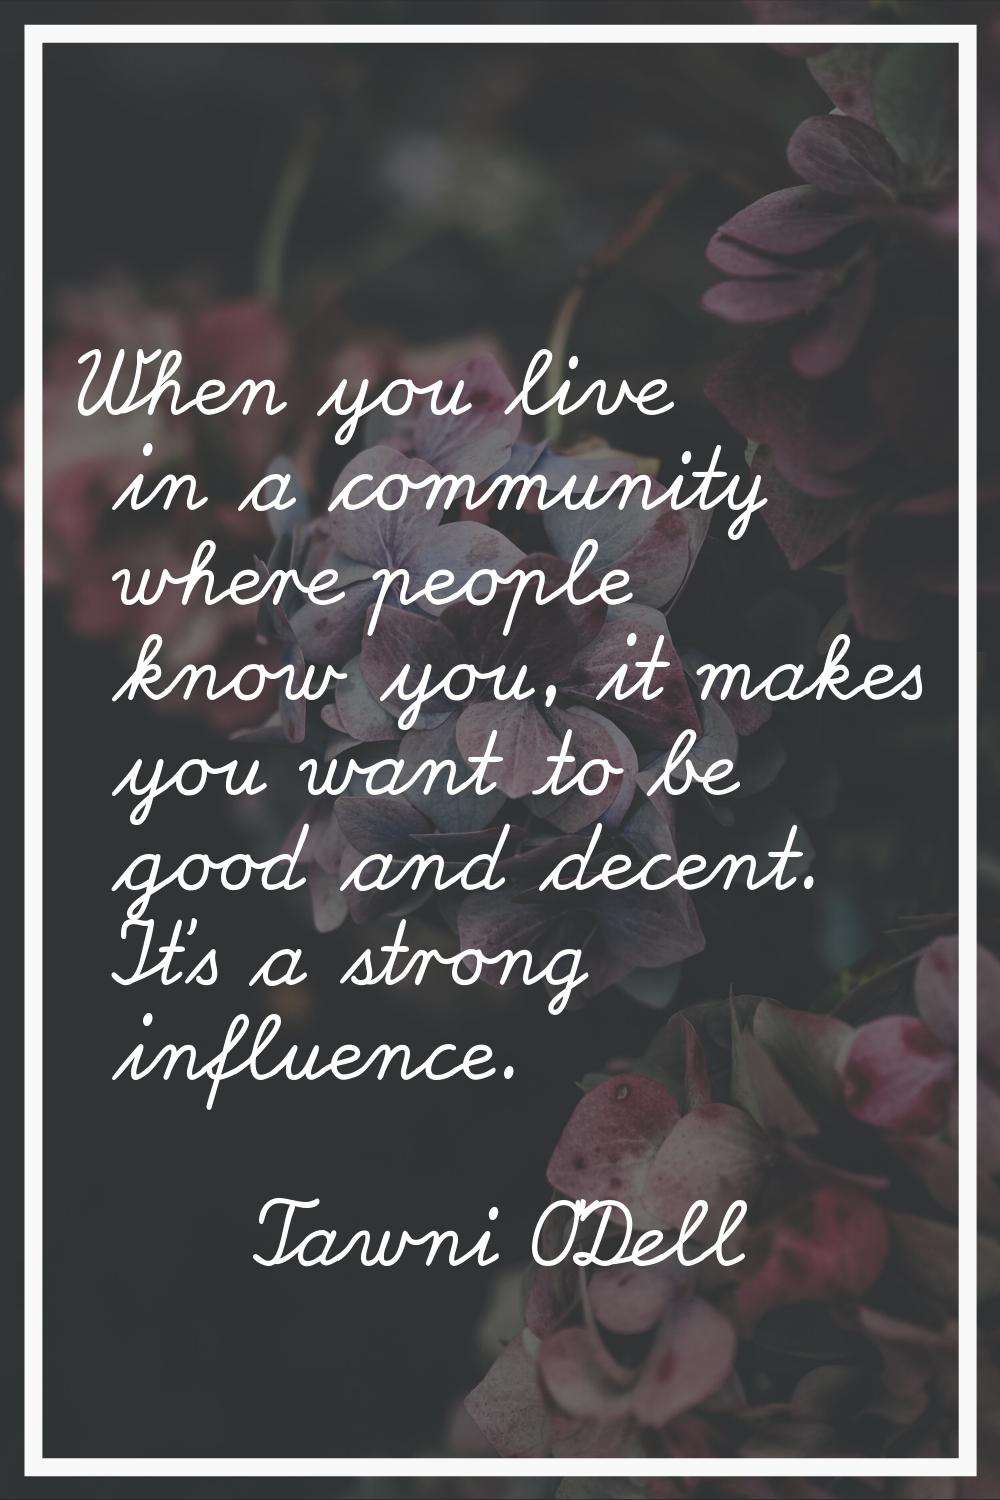 When you live in a community where people know you, it makes you want to be good and decent. It's a